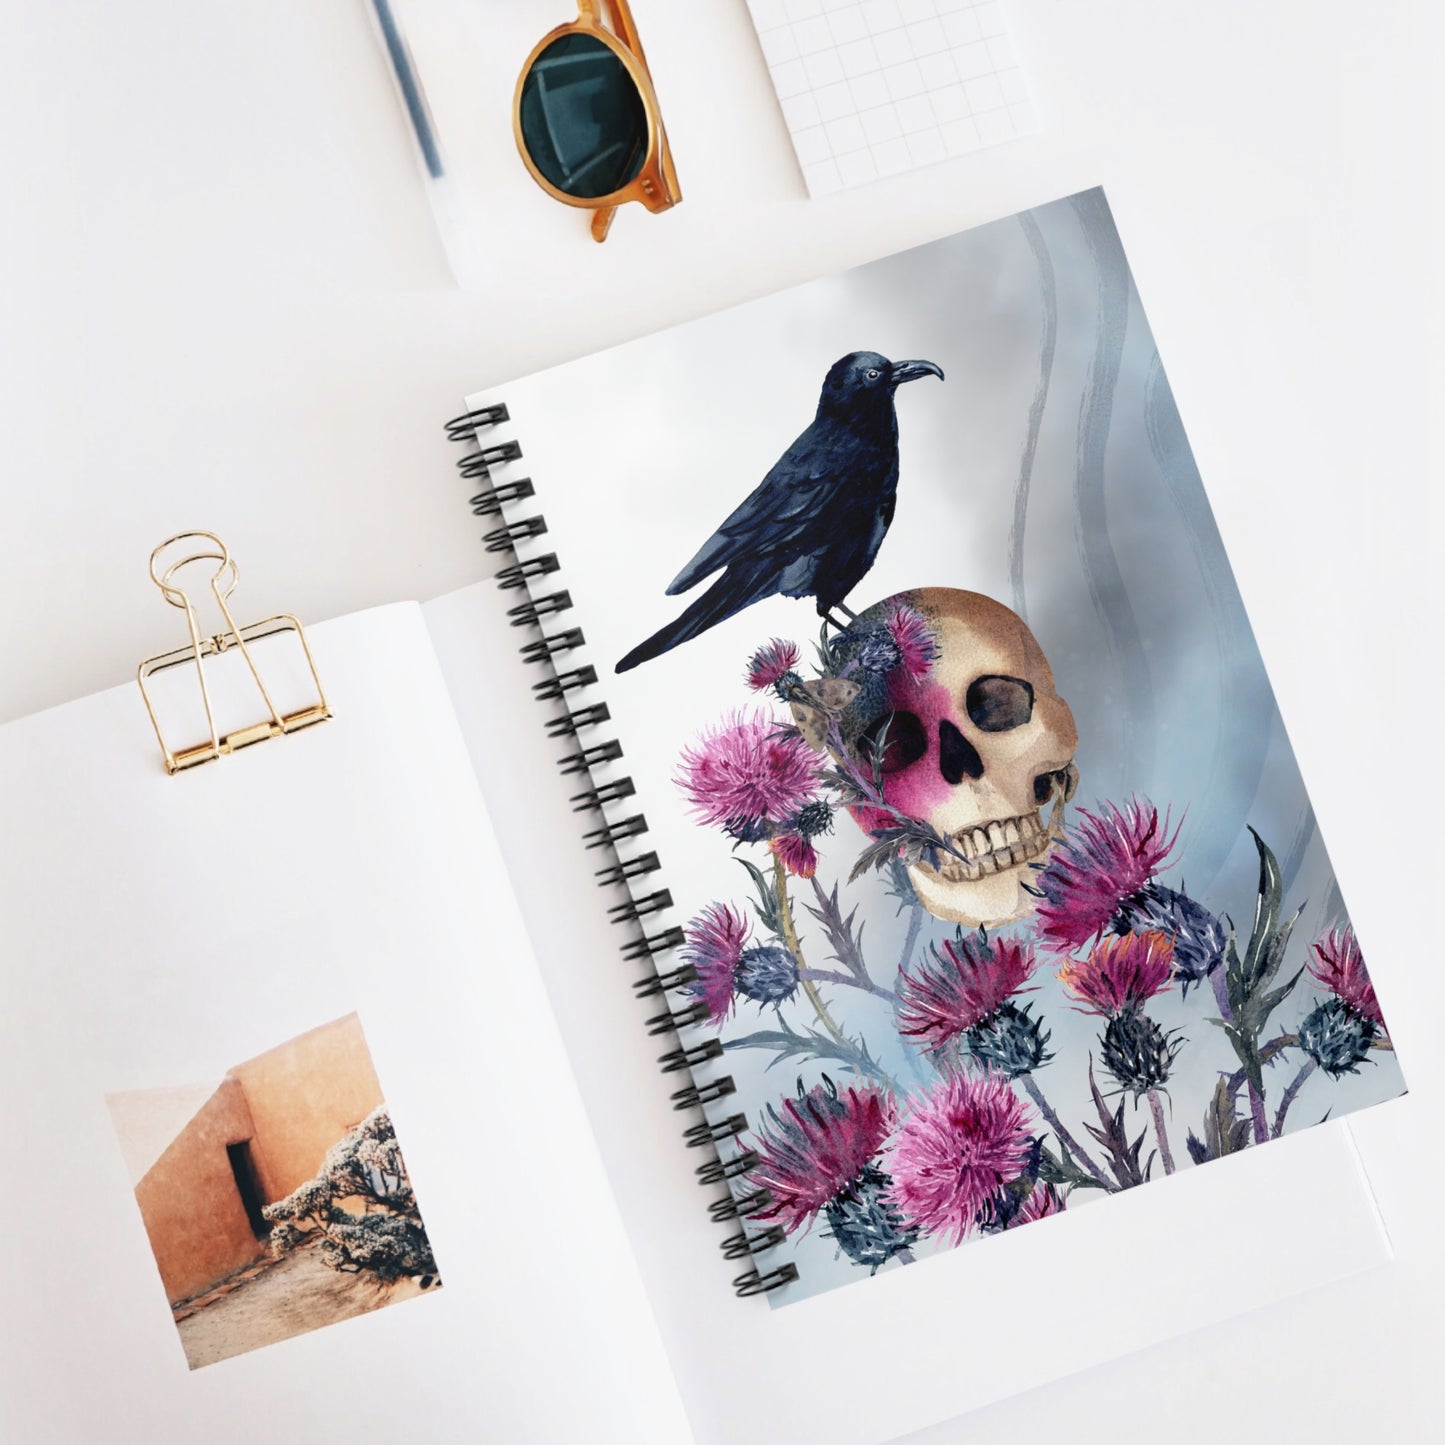 Quoth the Raven: Spiral Notebook - Log Books - Journals - Diaries - and More Custom Printed by TheGlassyLass.com